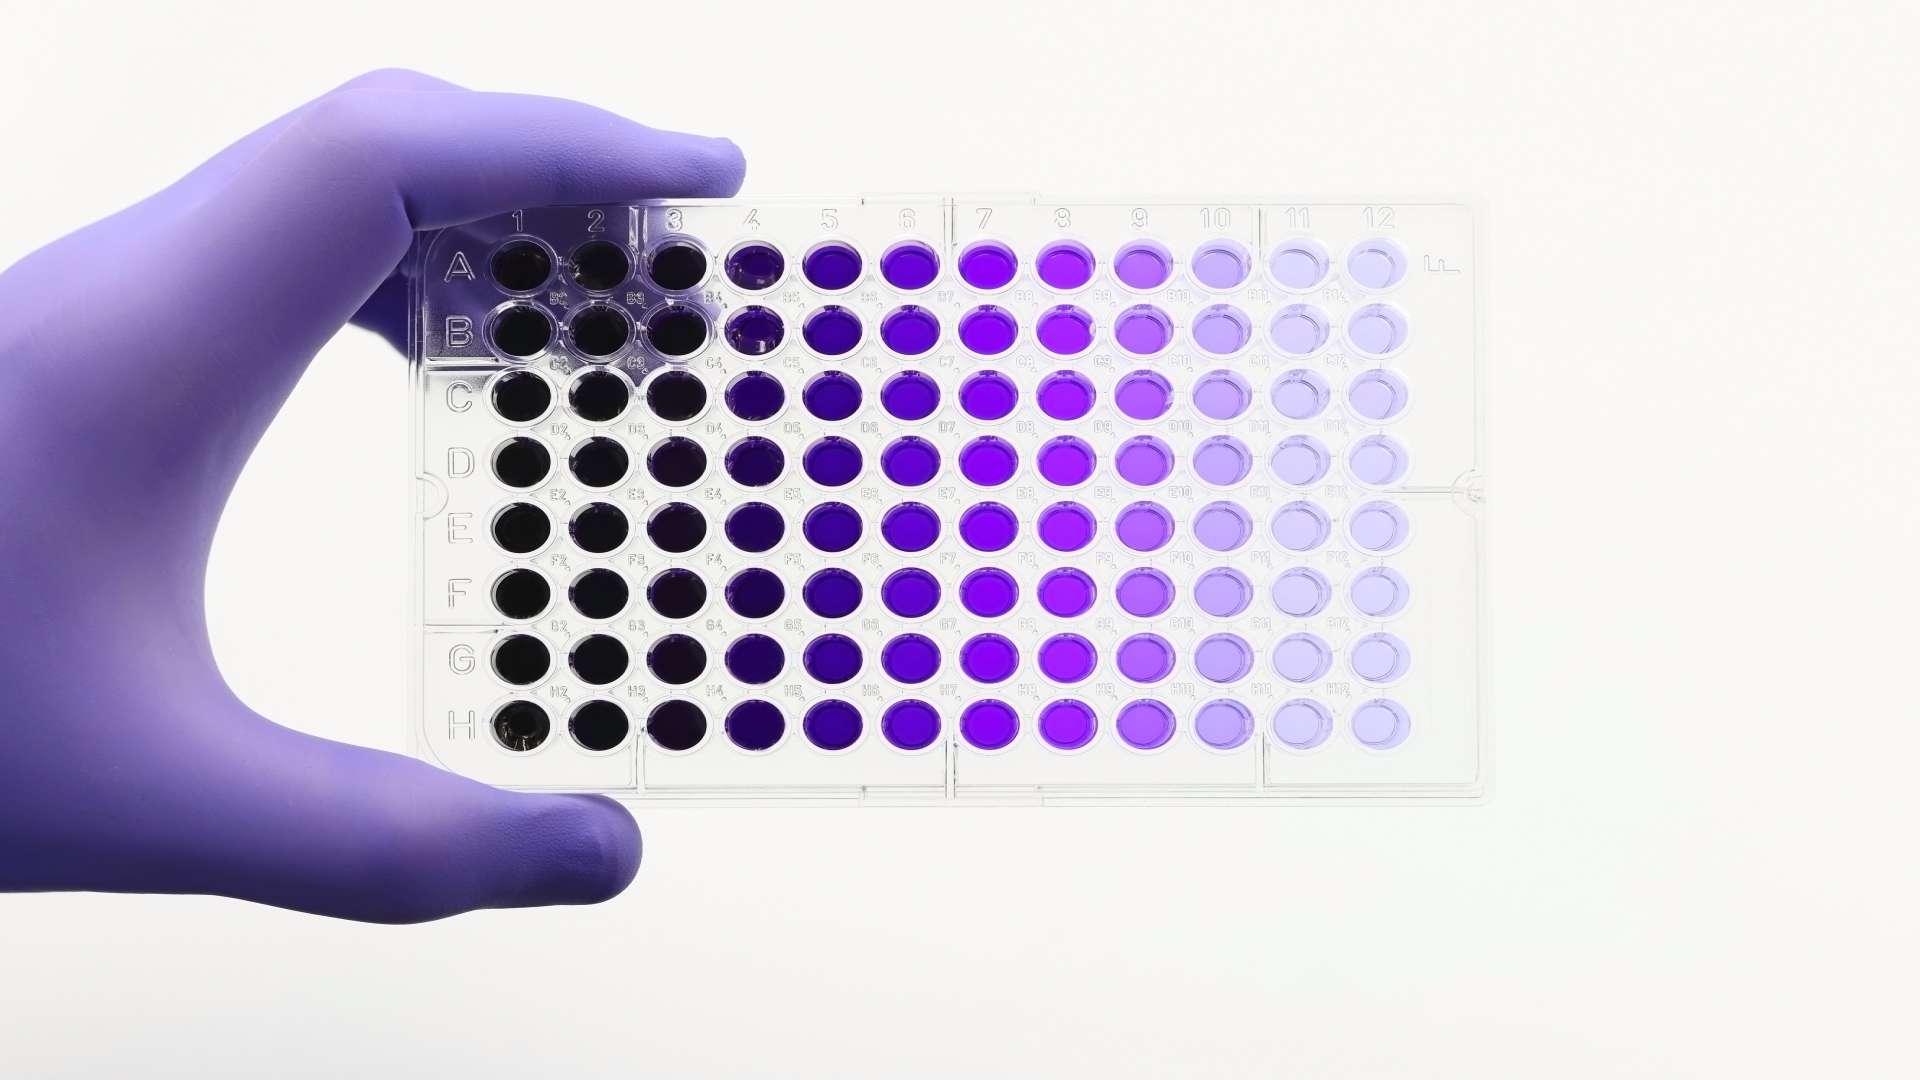 Hand with glove picking up a lab plate with clinical or research samples